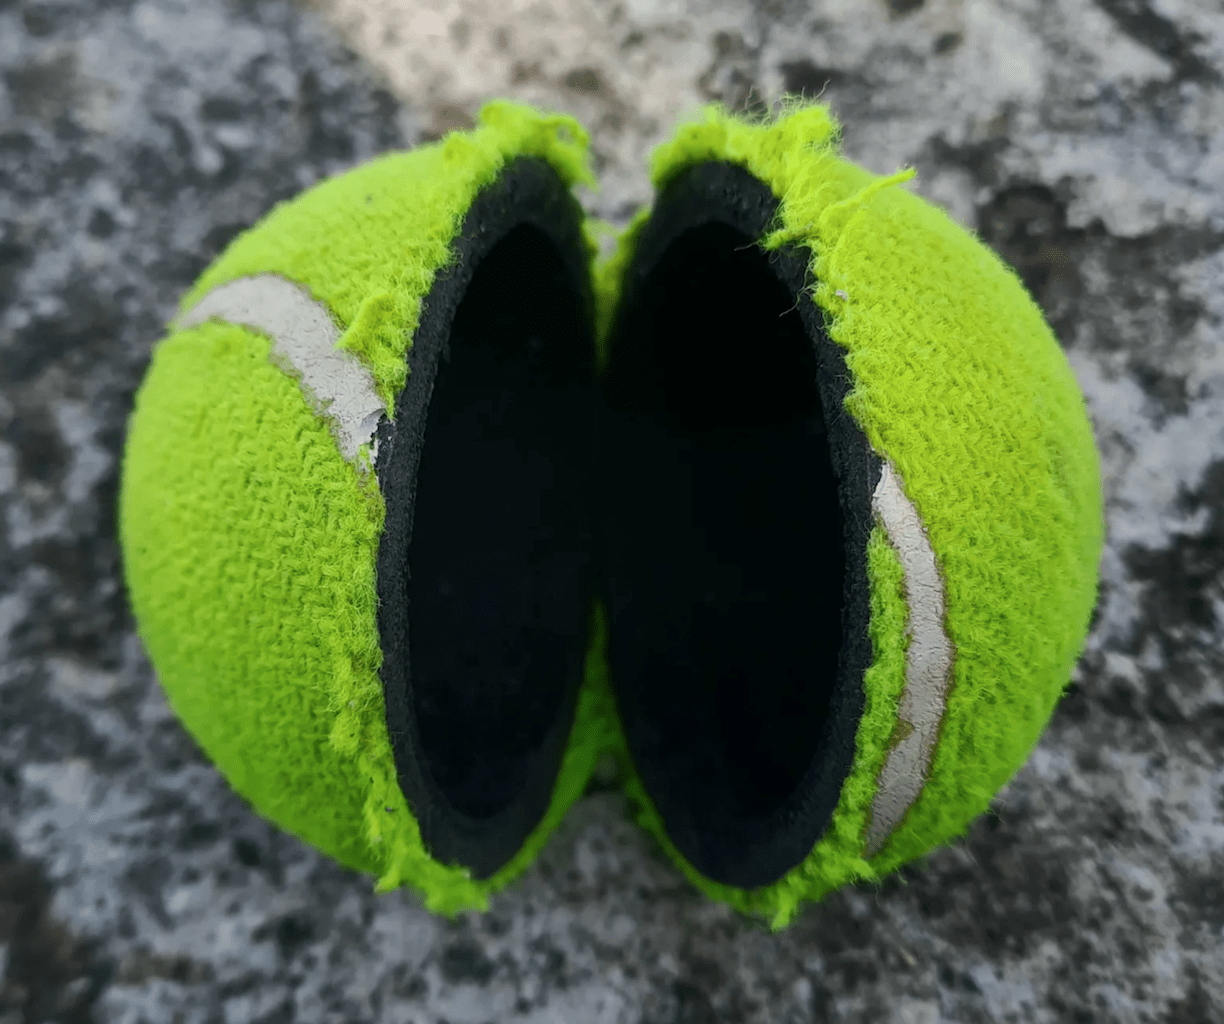 close up of black inside of tennis ball that has been cut in half